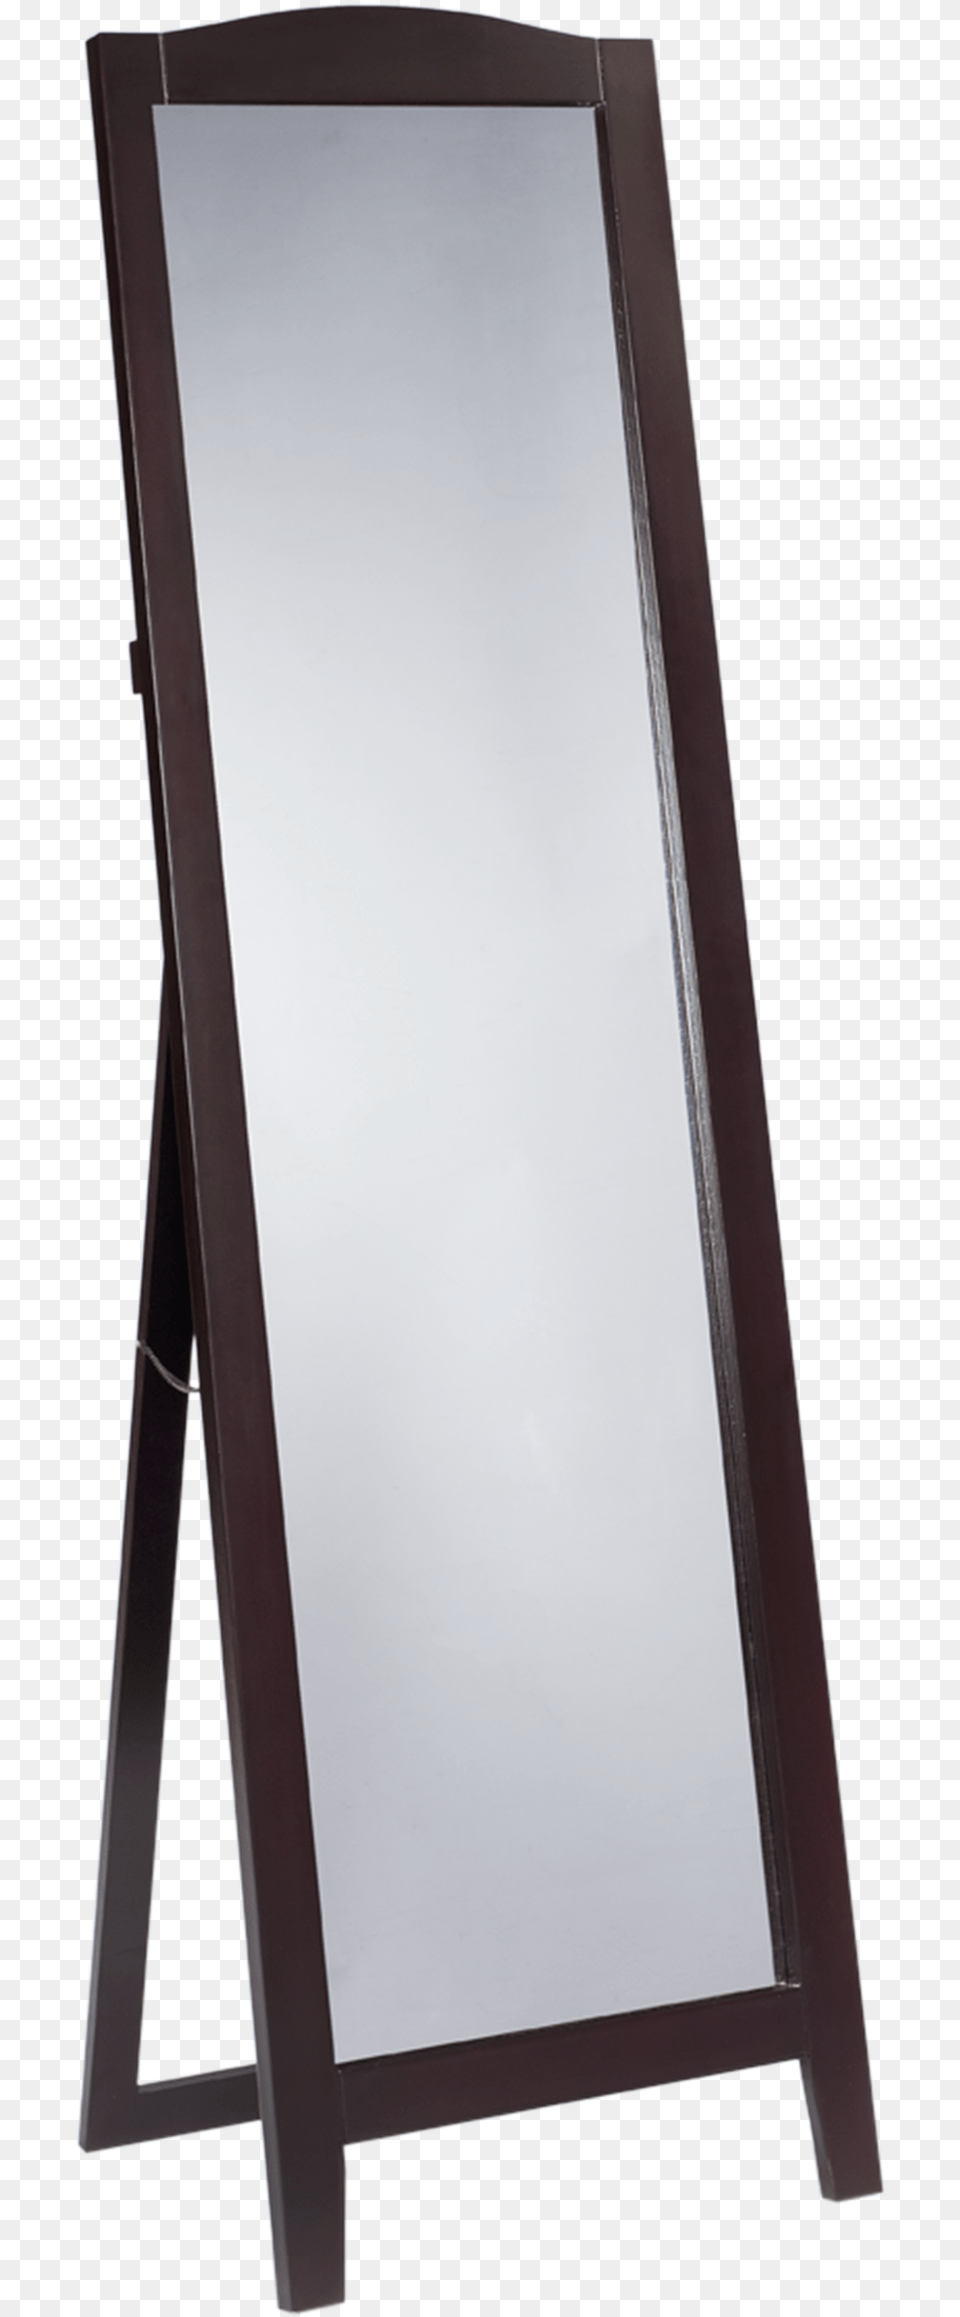 Easel Mirror Free Png Download